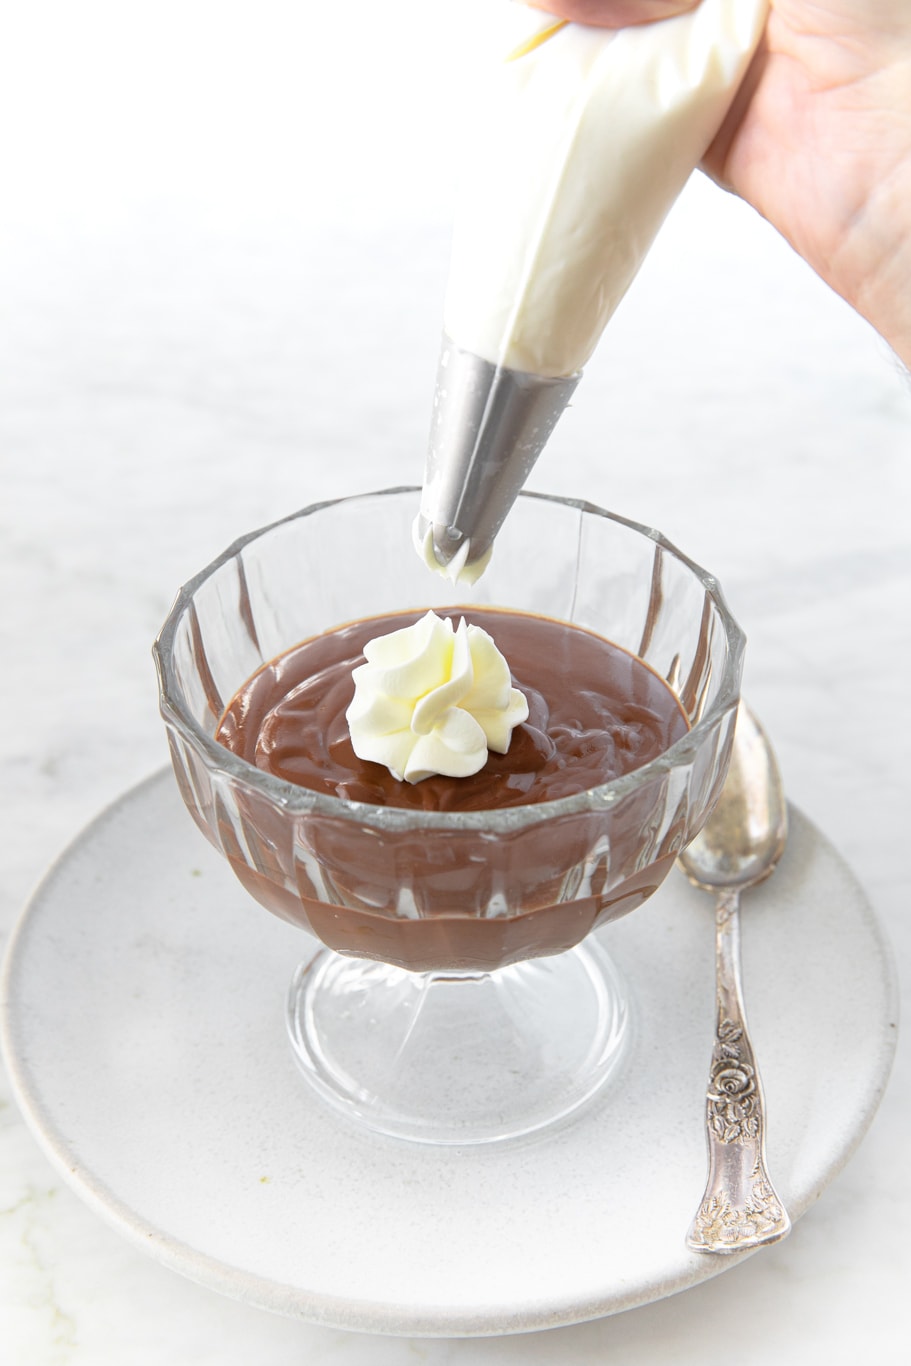 Chocolate Pudding Recipe Italian Style - The Reluctant Gourmet